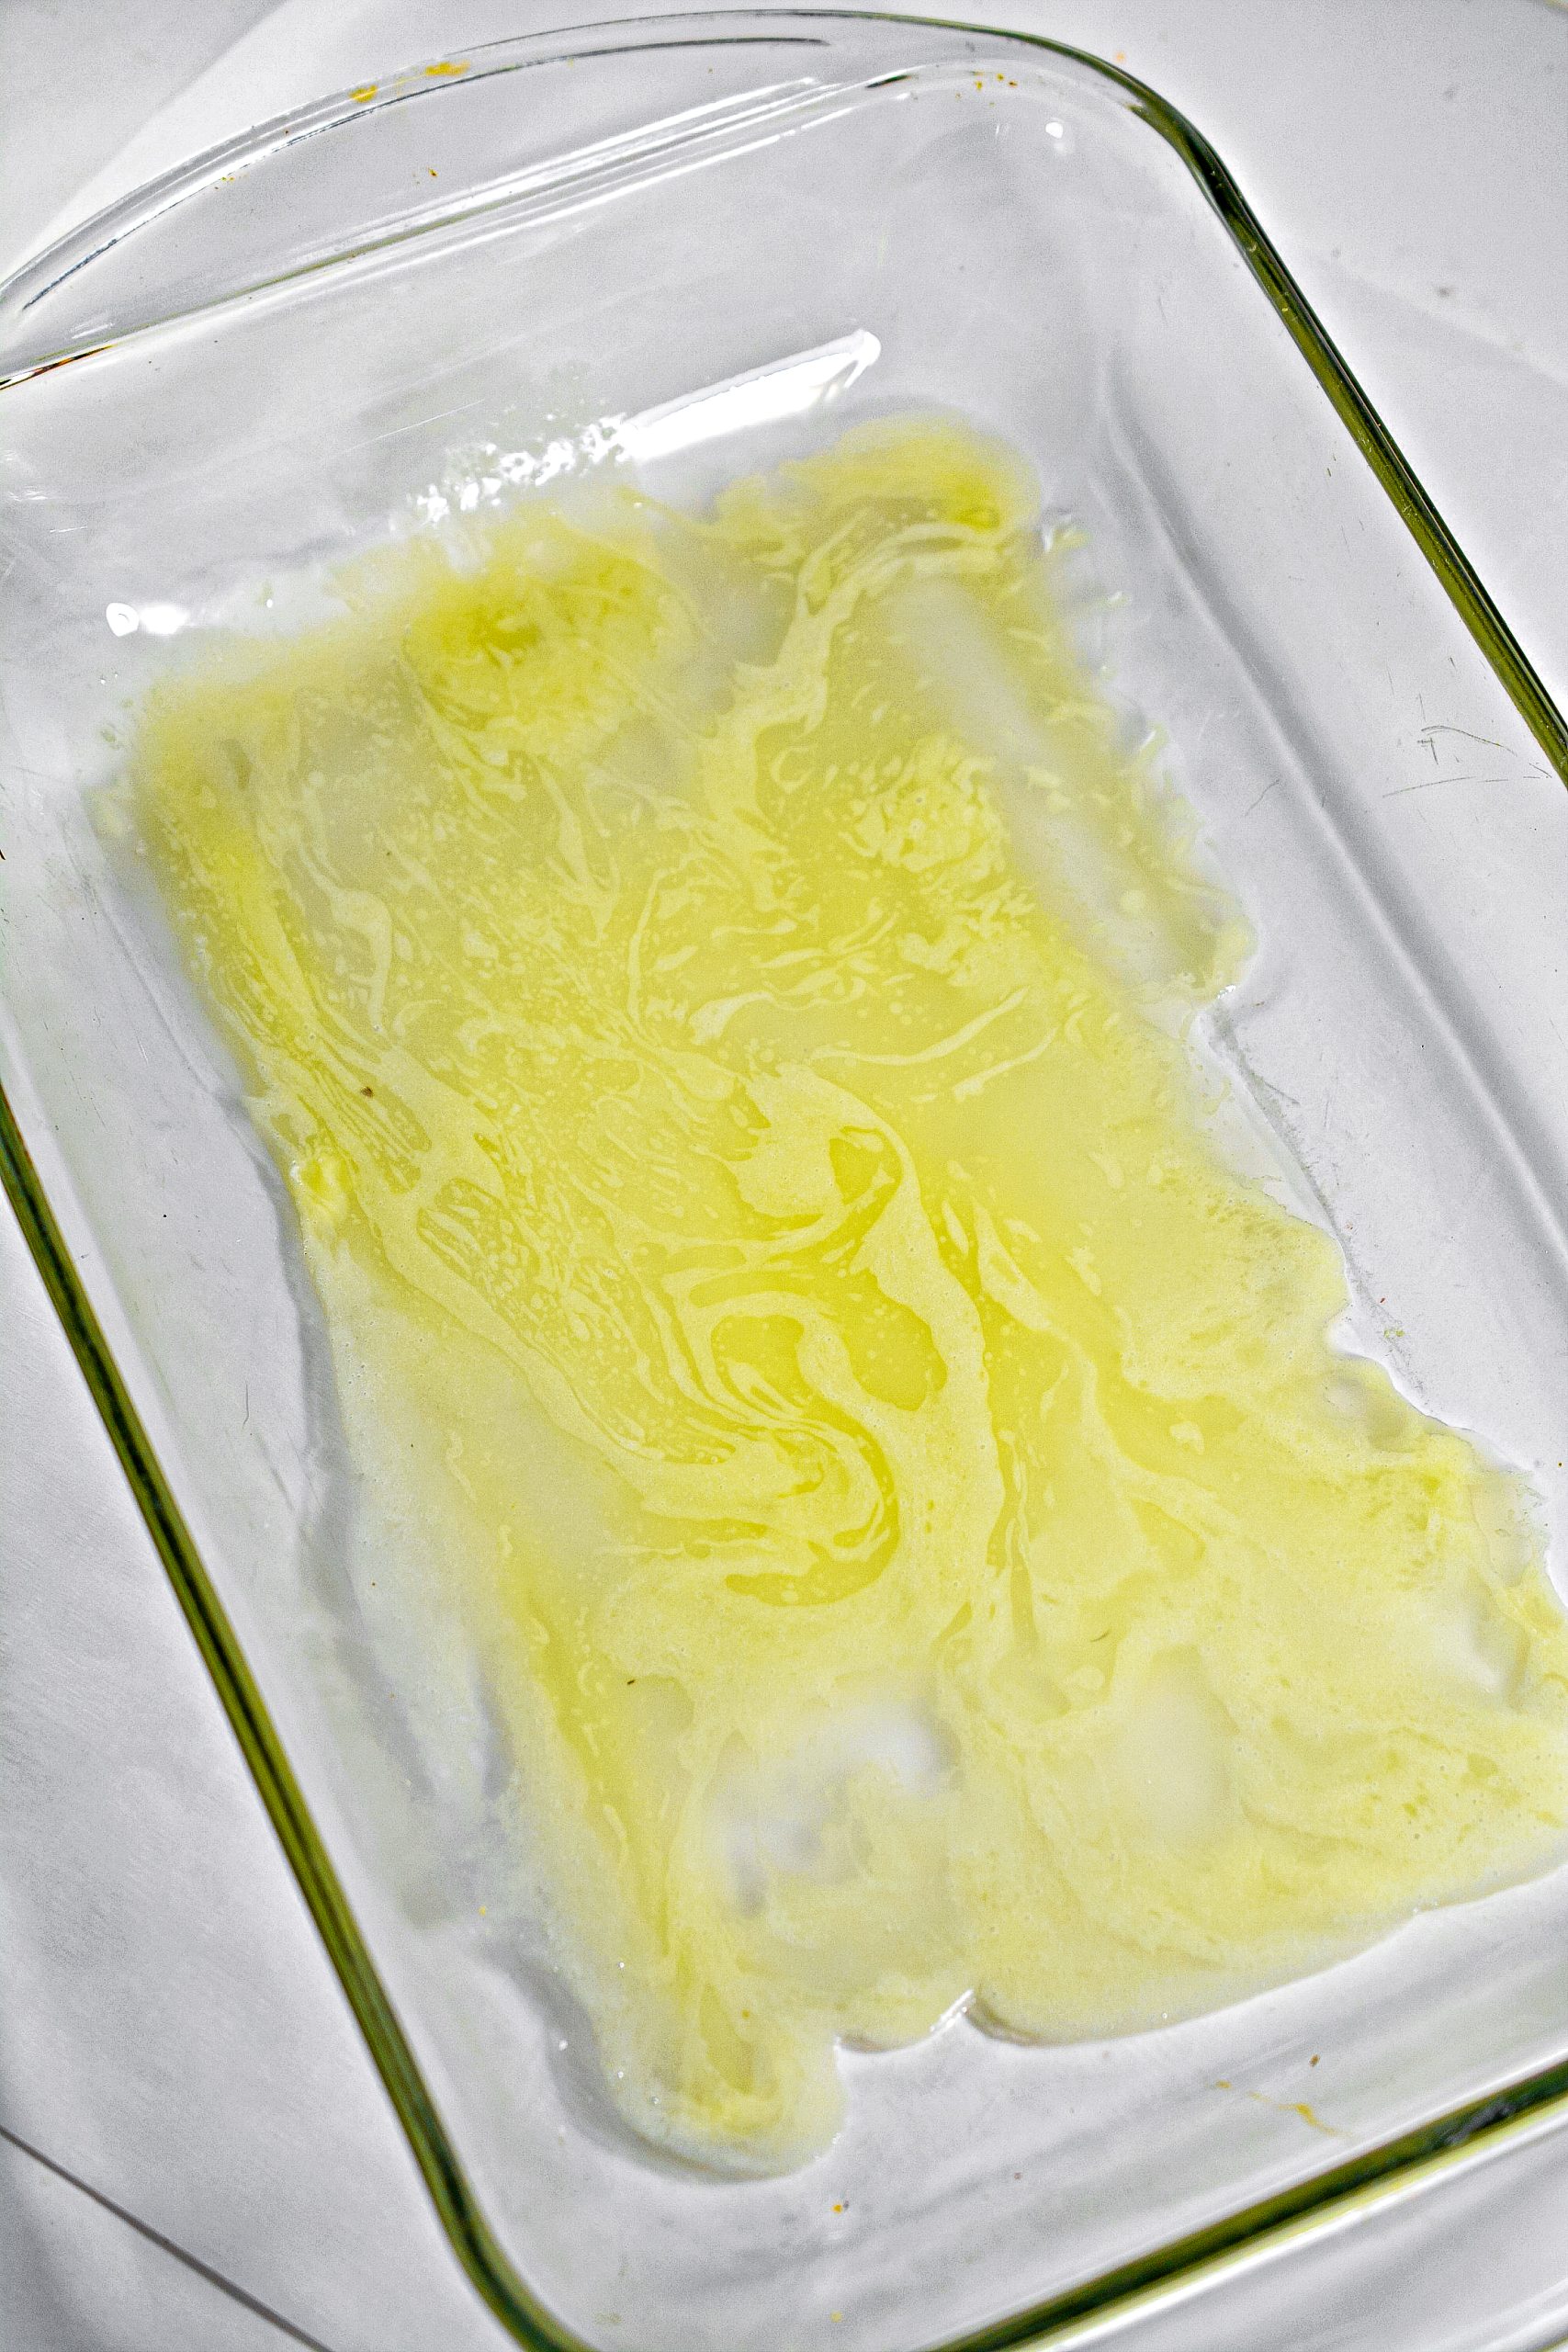 Pour the butter into a 9x13 baking dish